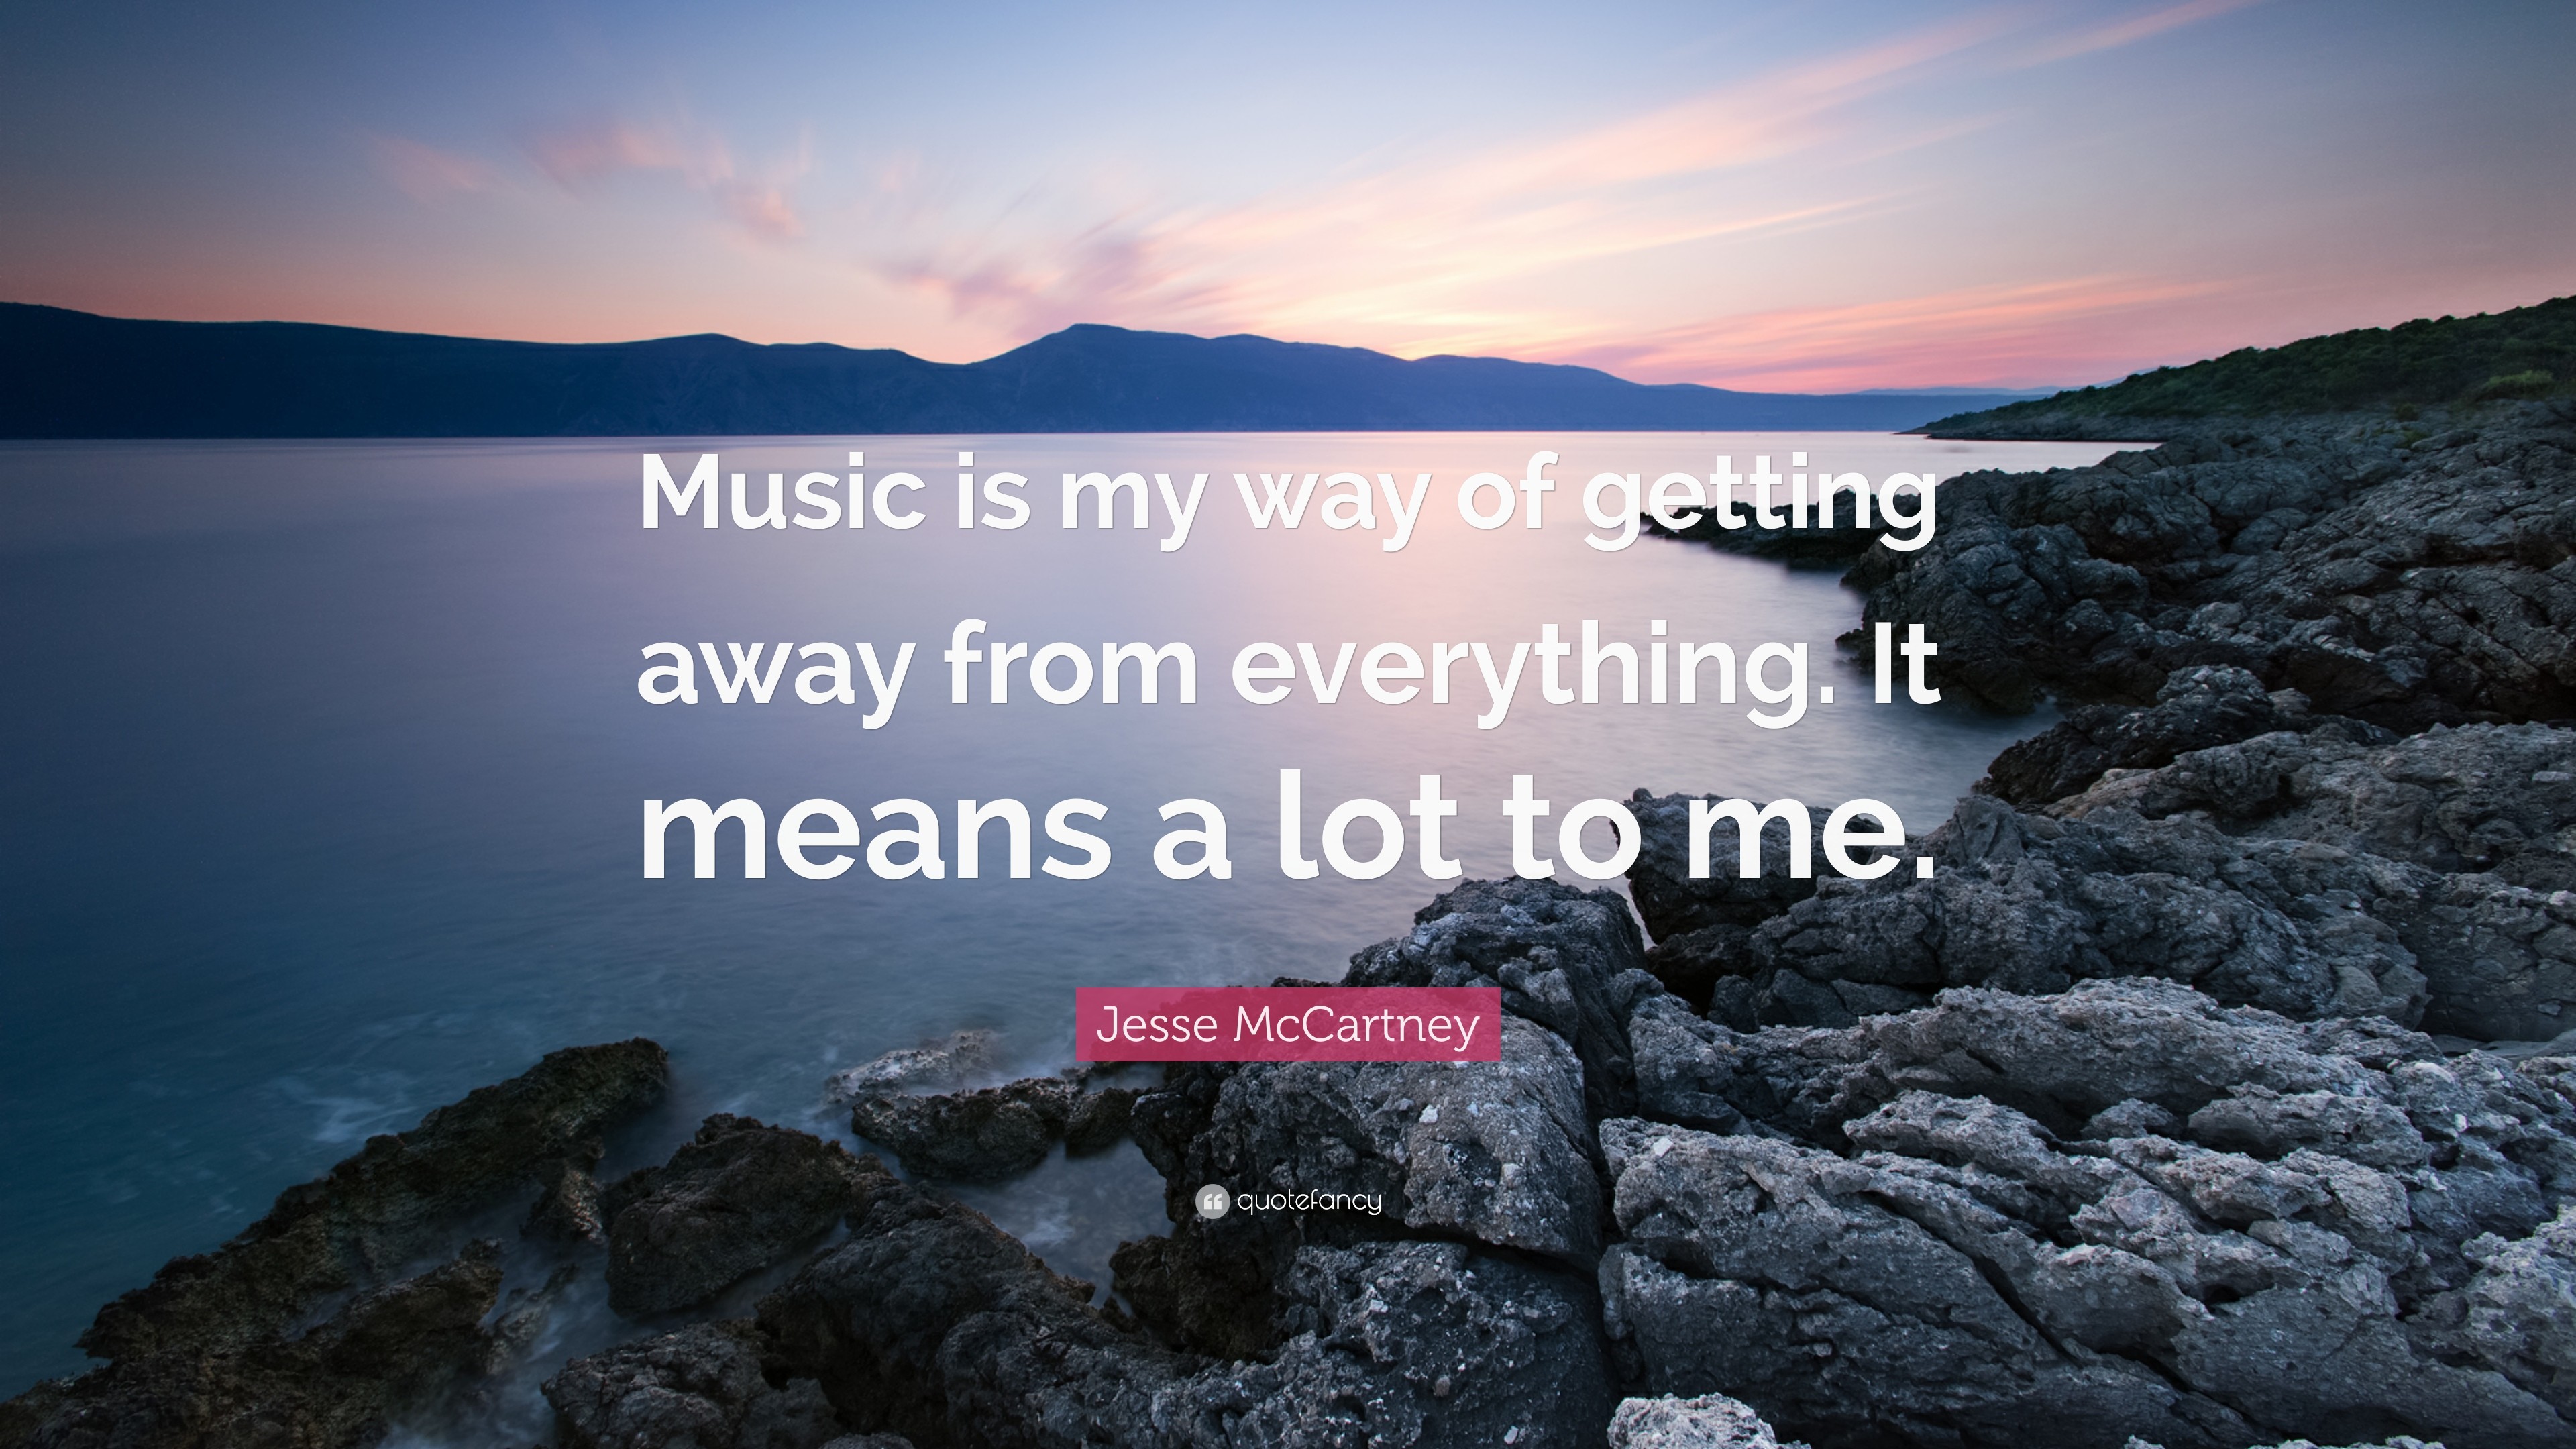 3840x2160 Jesse McCartney Quote: “Music is my way of getting away from everything. It